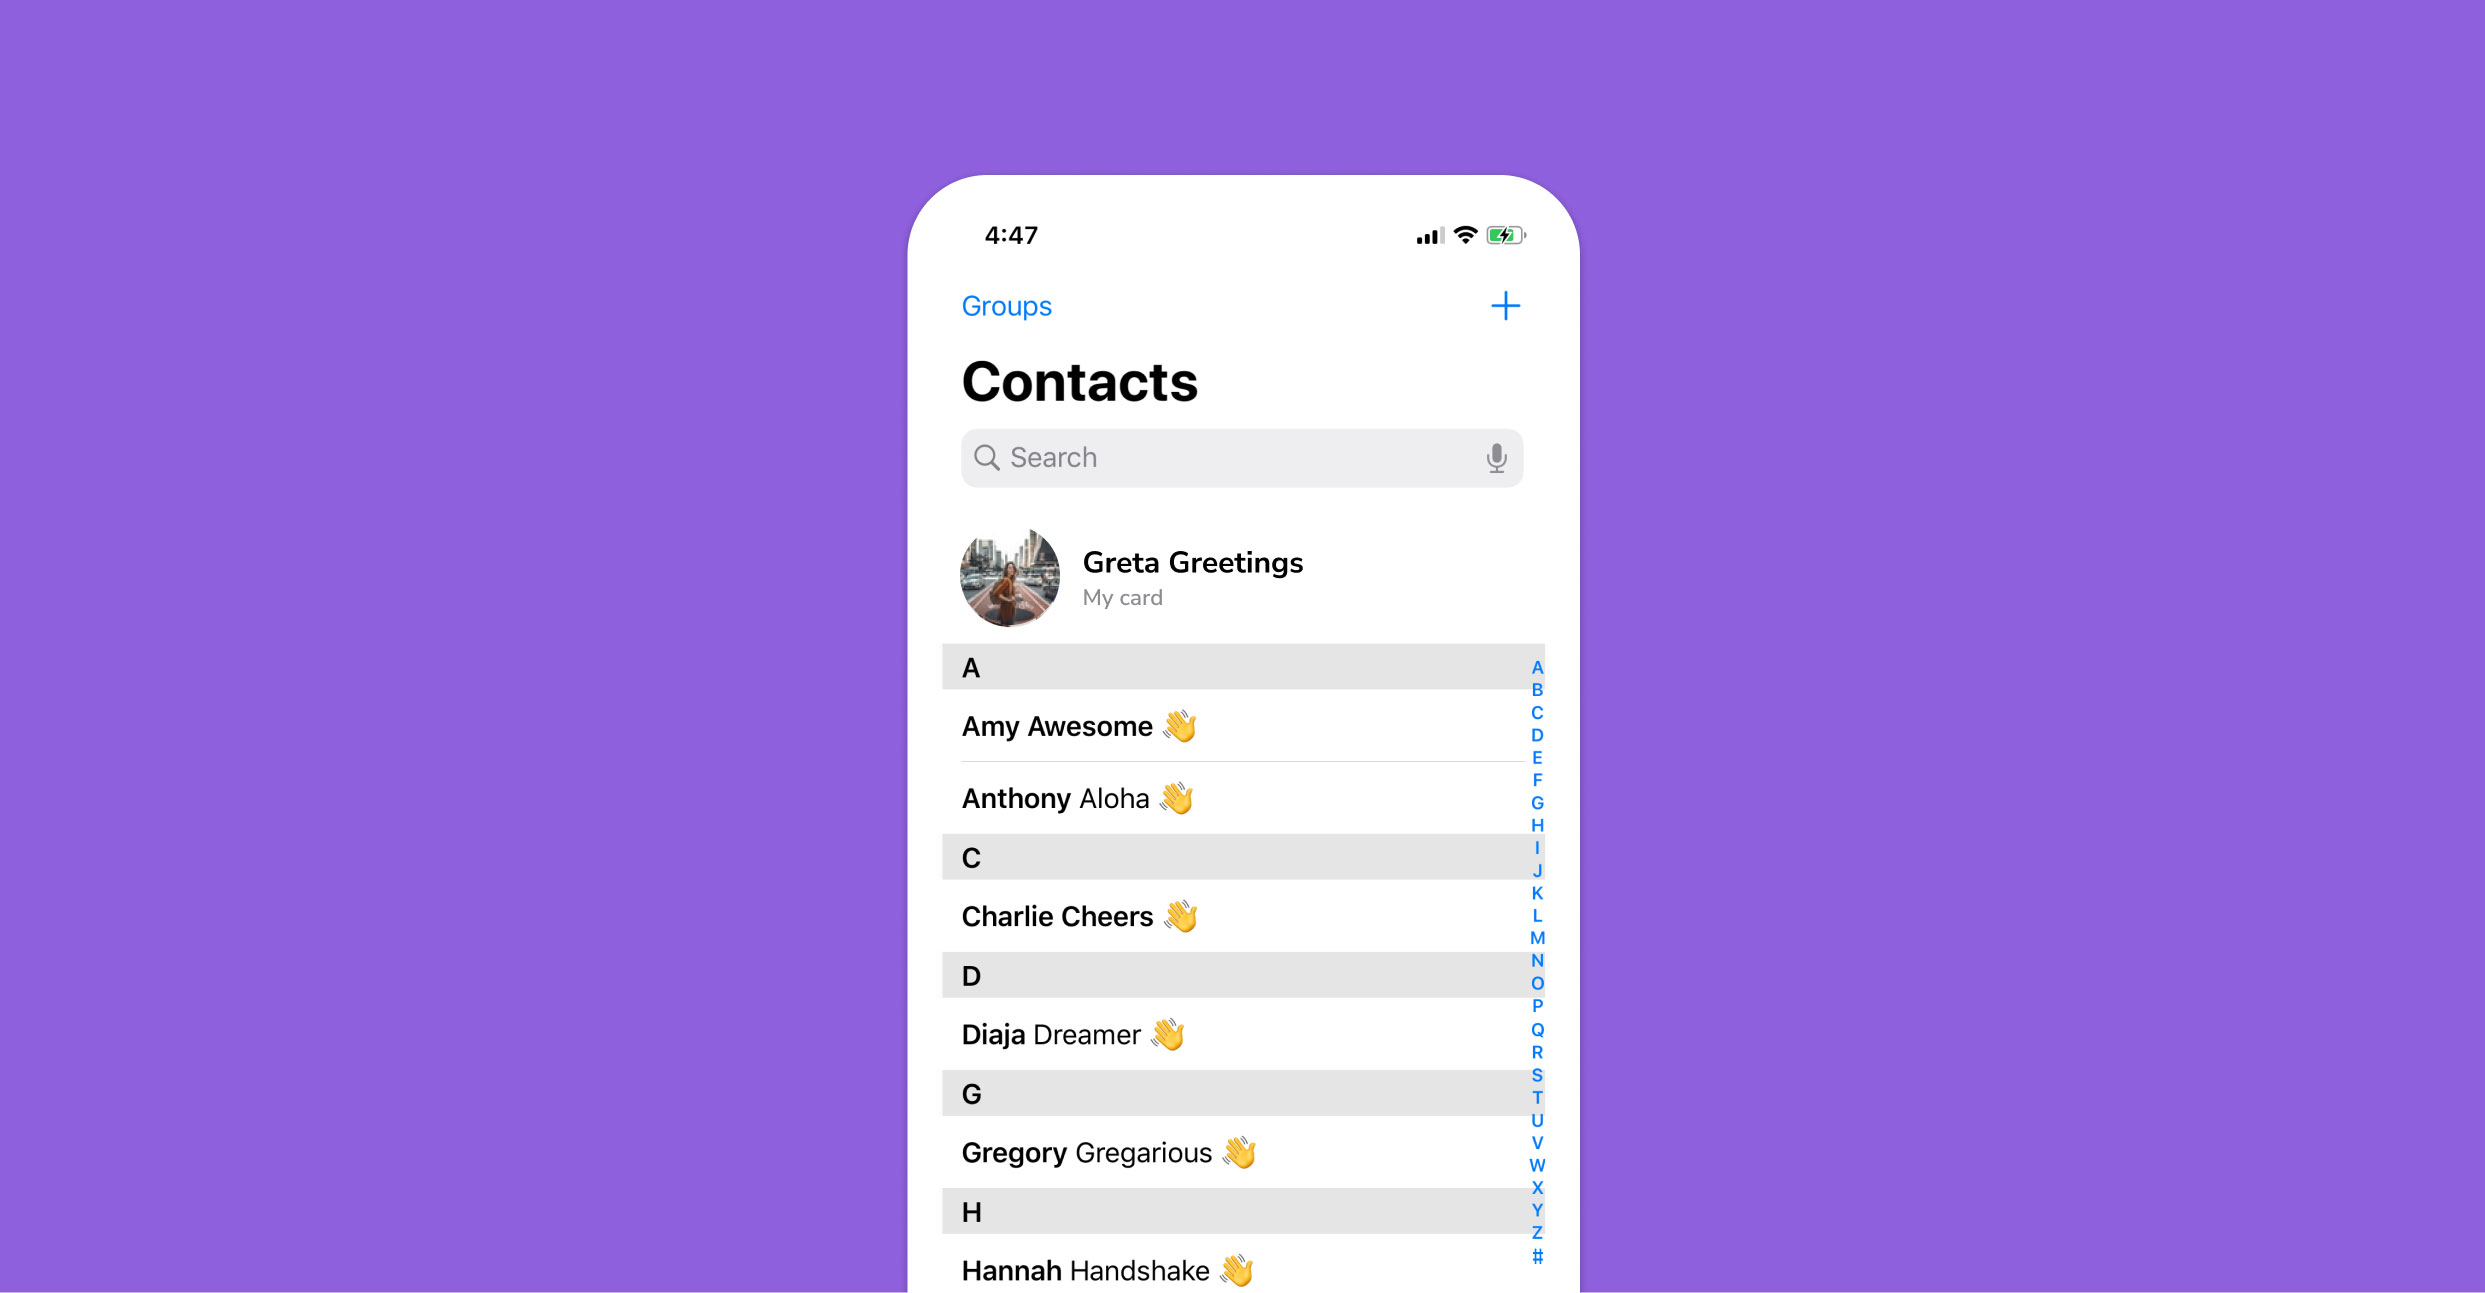 HiHello iOS app contacts on iPhone address book